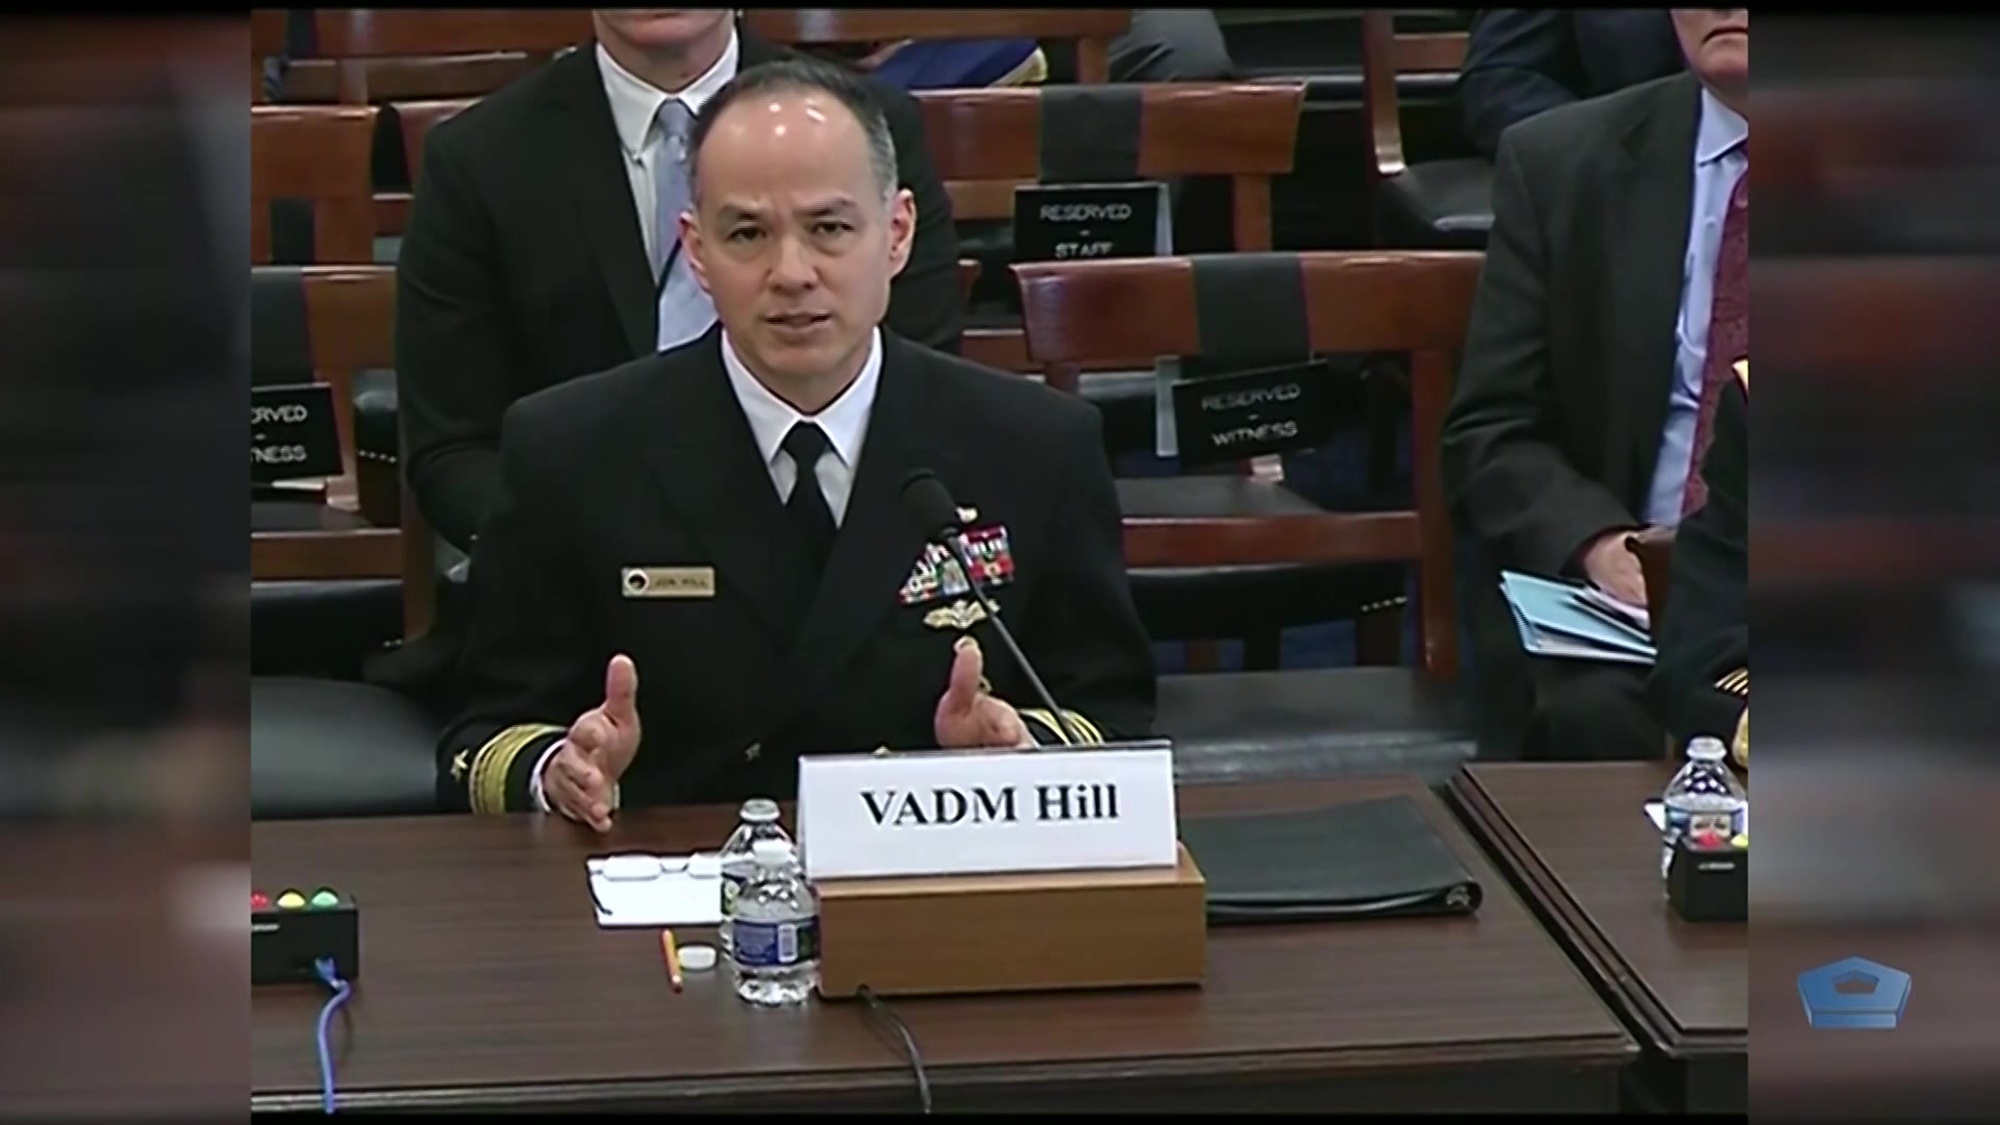 A Navy vice admiral speaks at a table. 